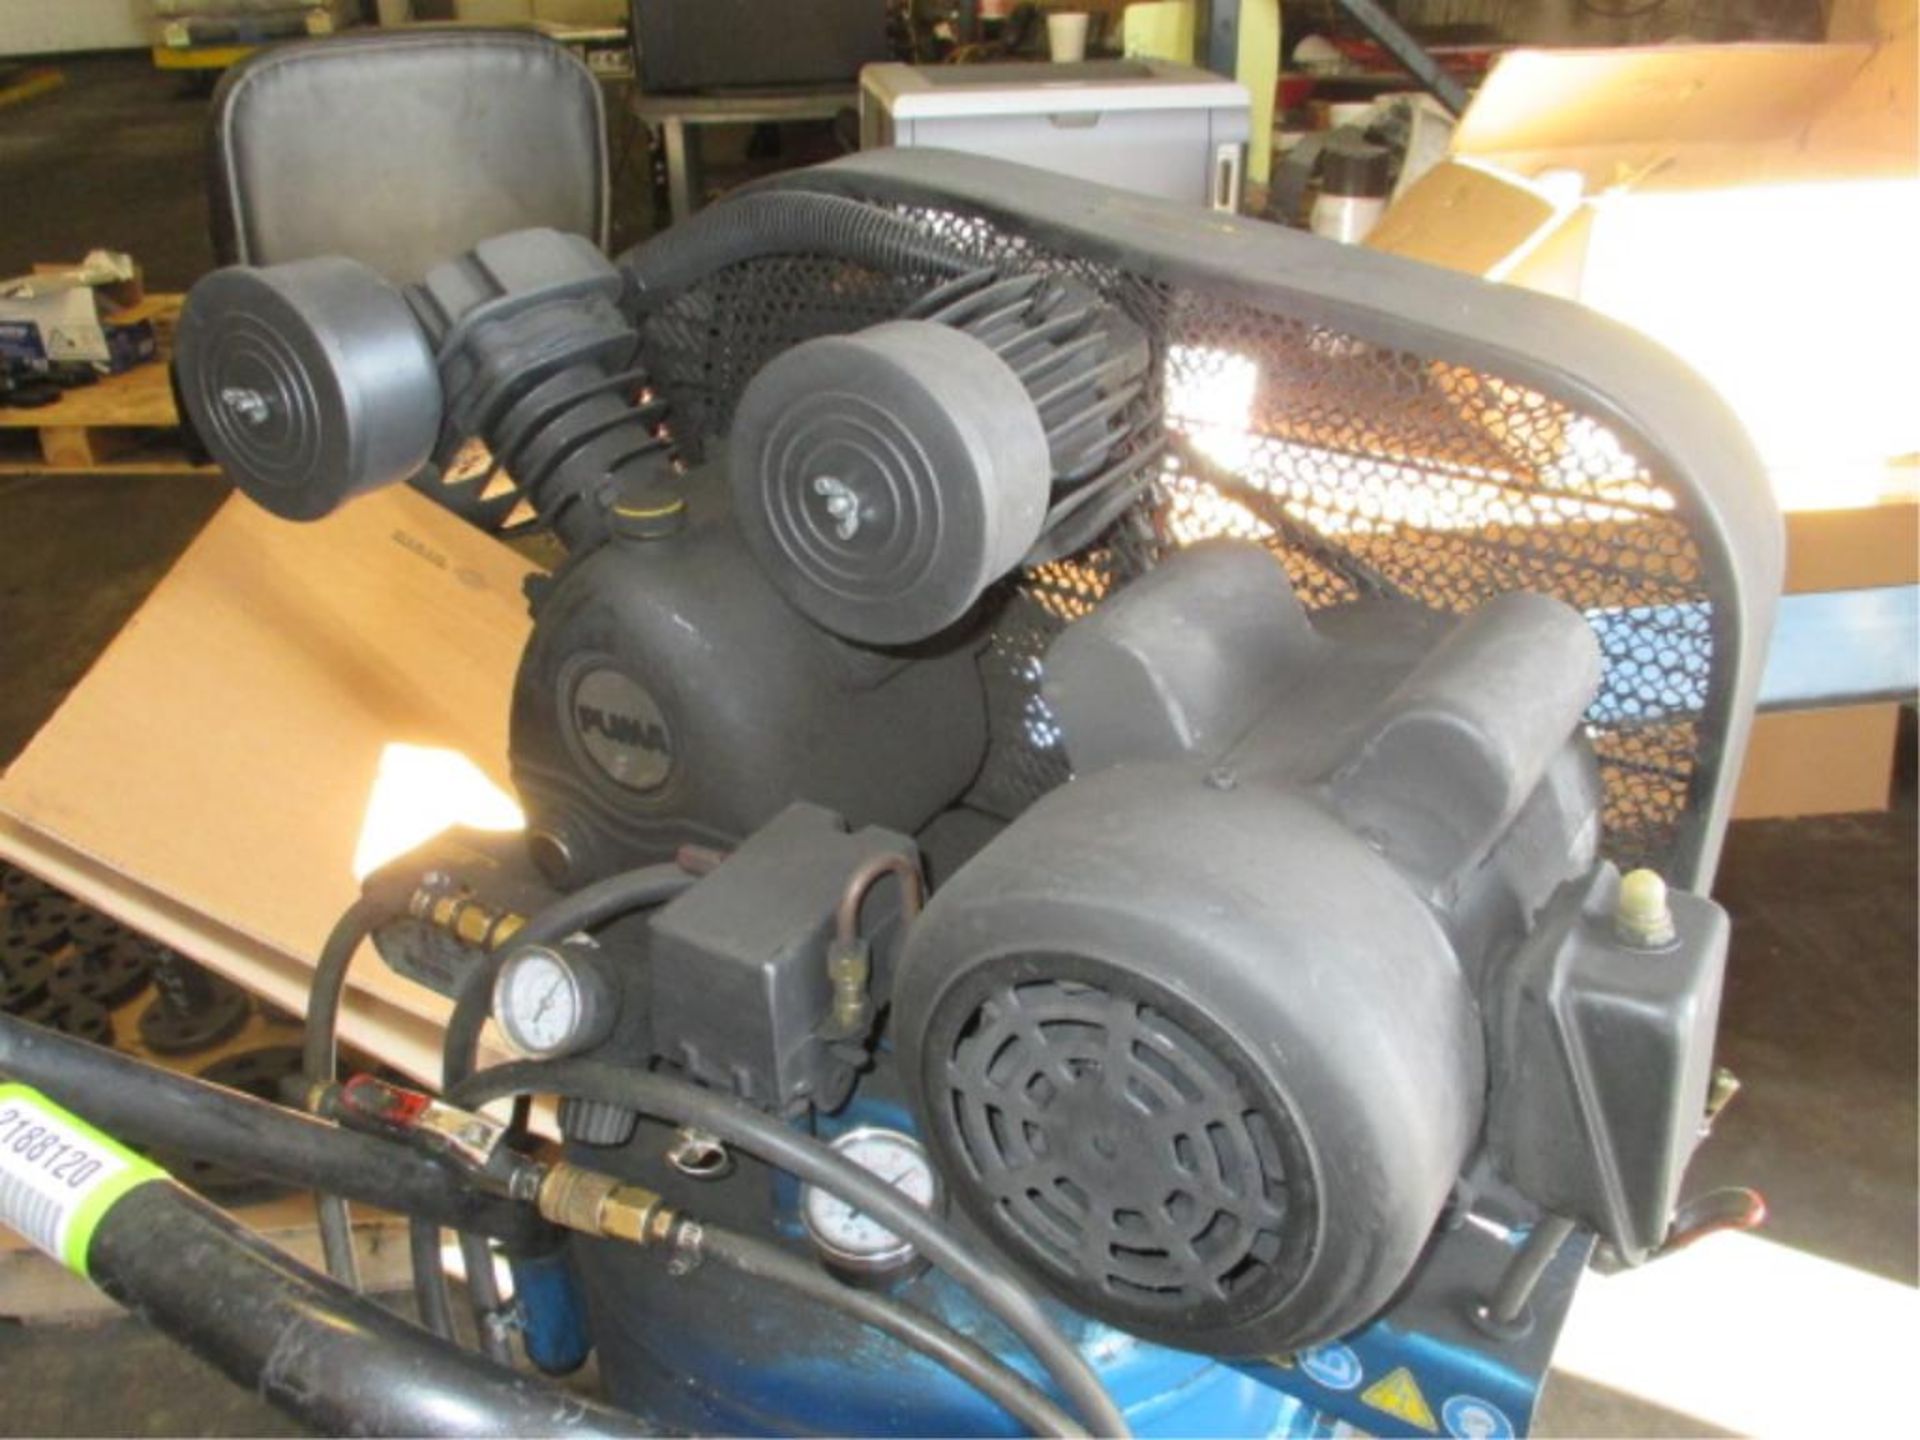 Puma UC0205 Air Compressor, 20 Gal., 135 PSI, 7.6CMF. HIT# 2188120. Building 1. Asset(s) Located - Image 2 of 2